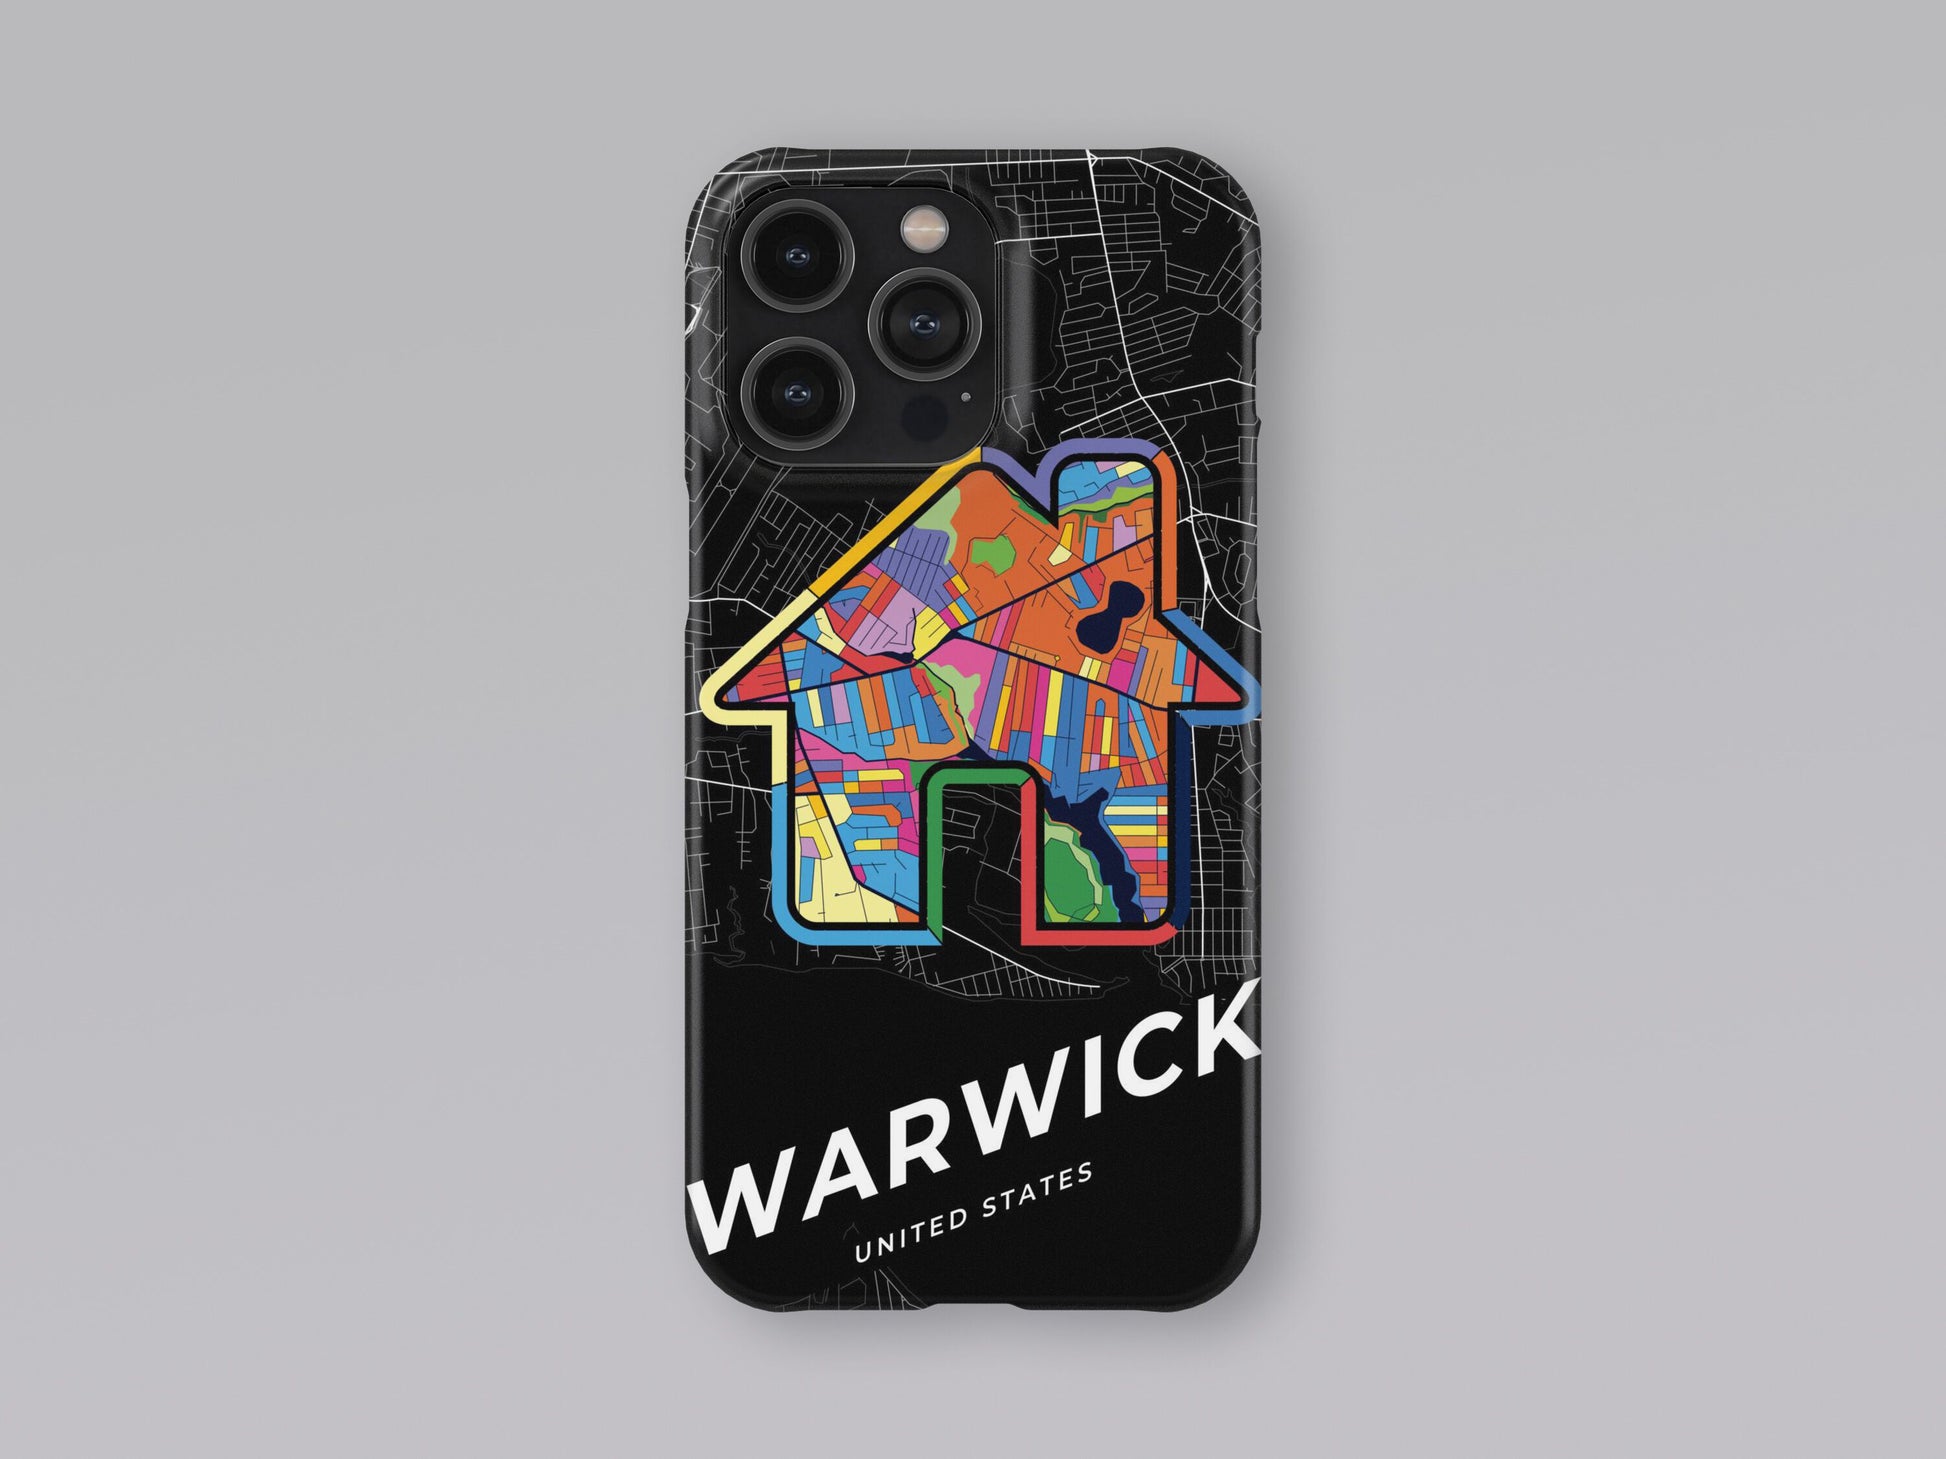 Warwick Rhode Island slim phone case with colorful icon 3